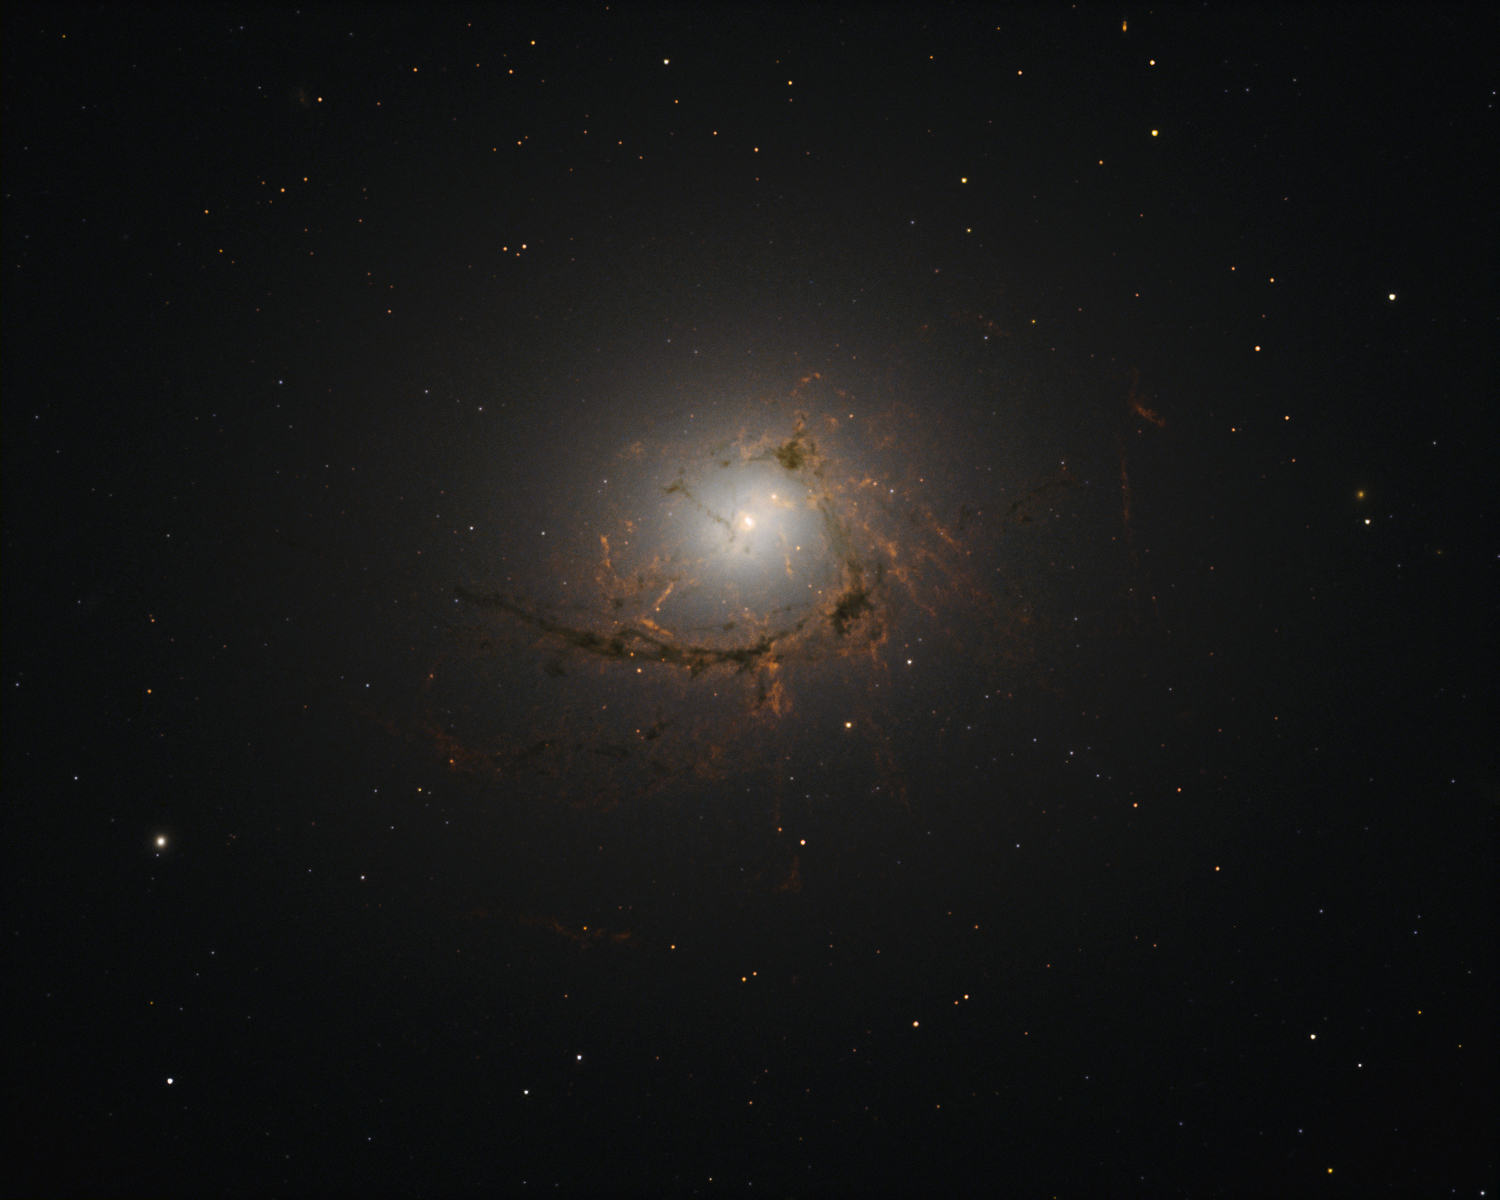 Dusty filaments in NGC 4696